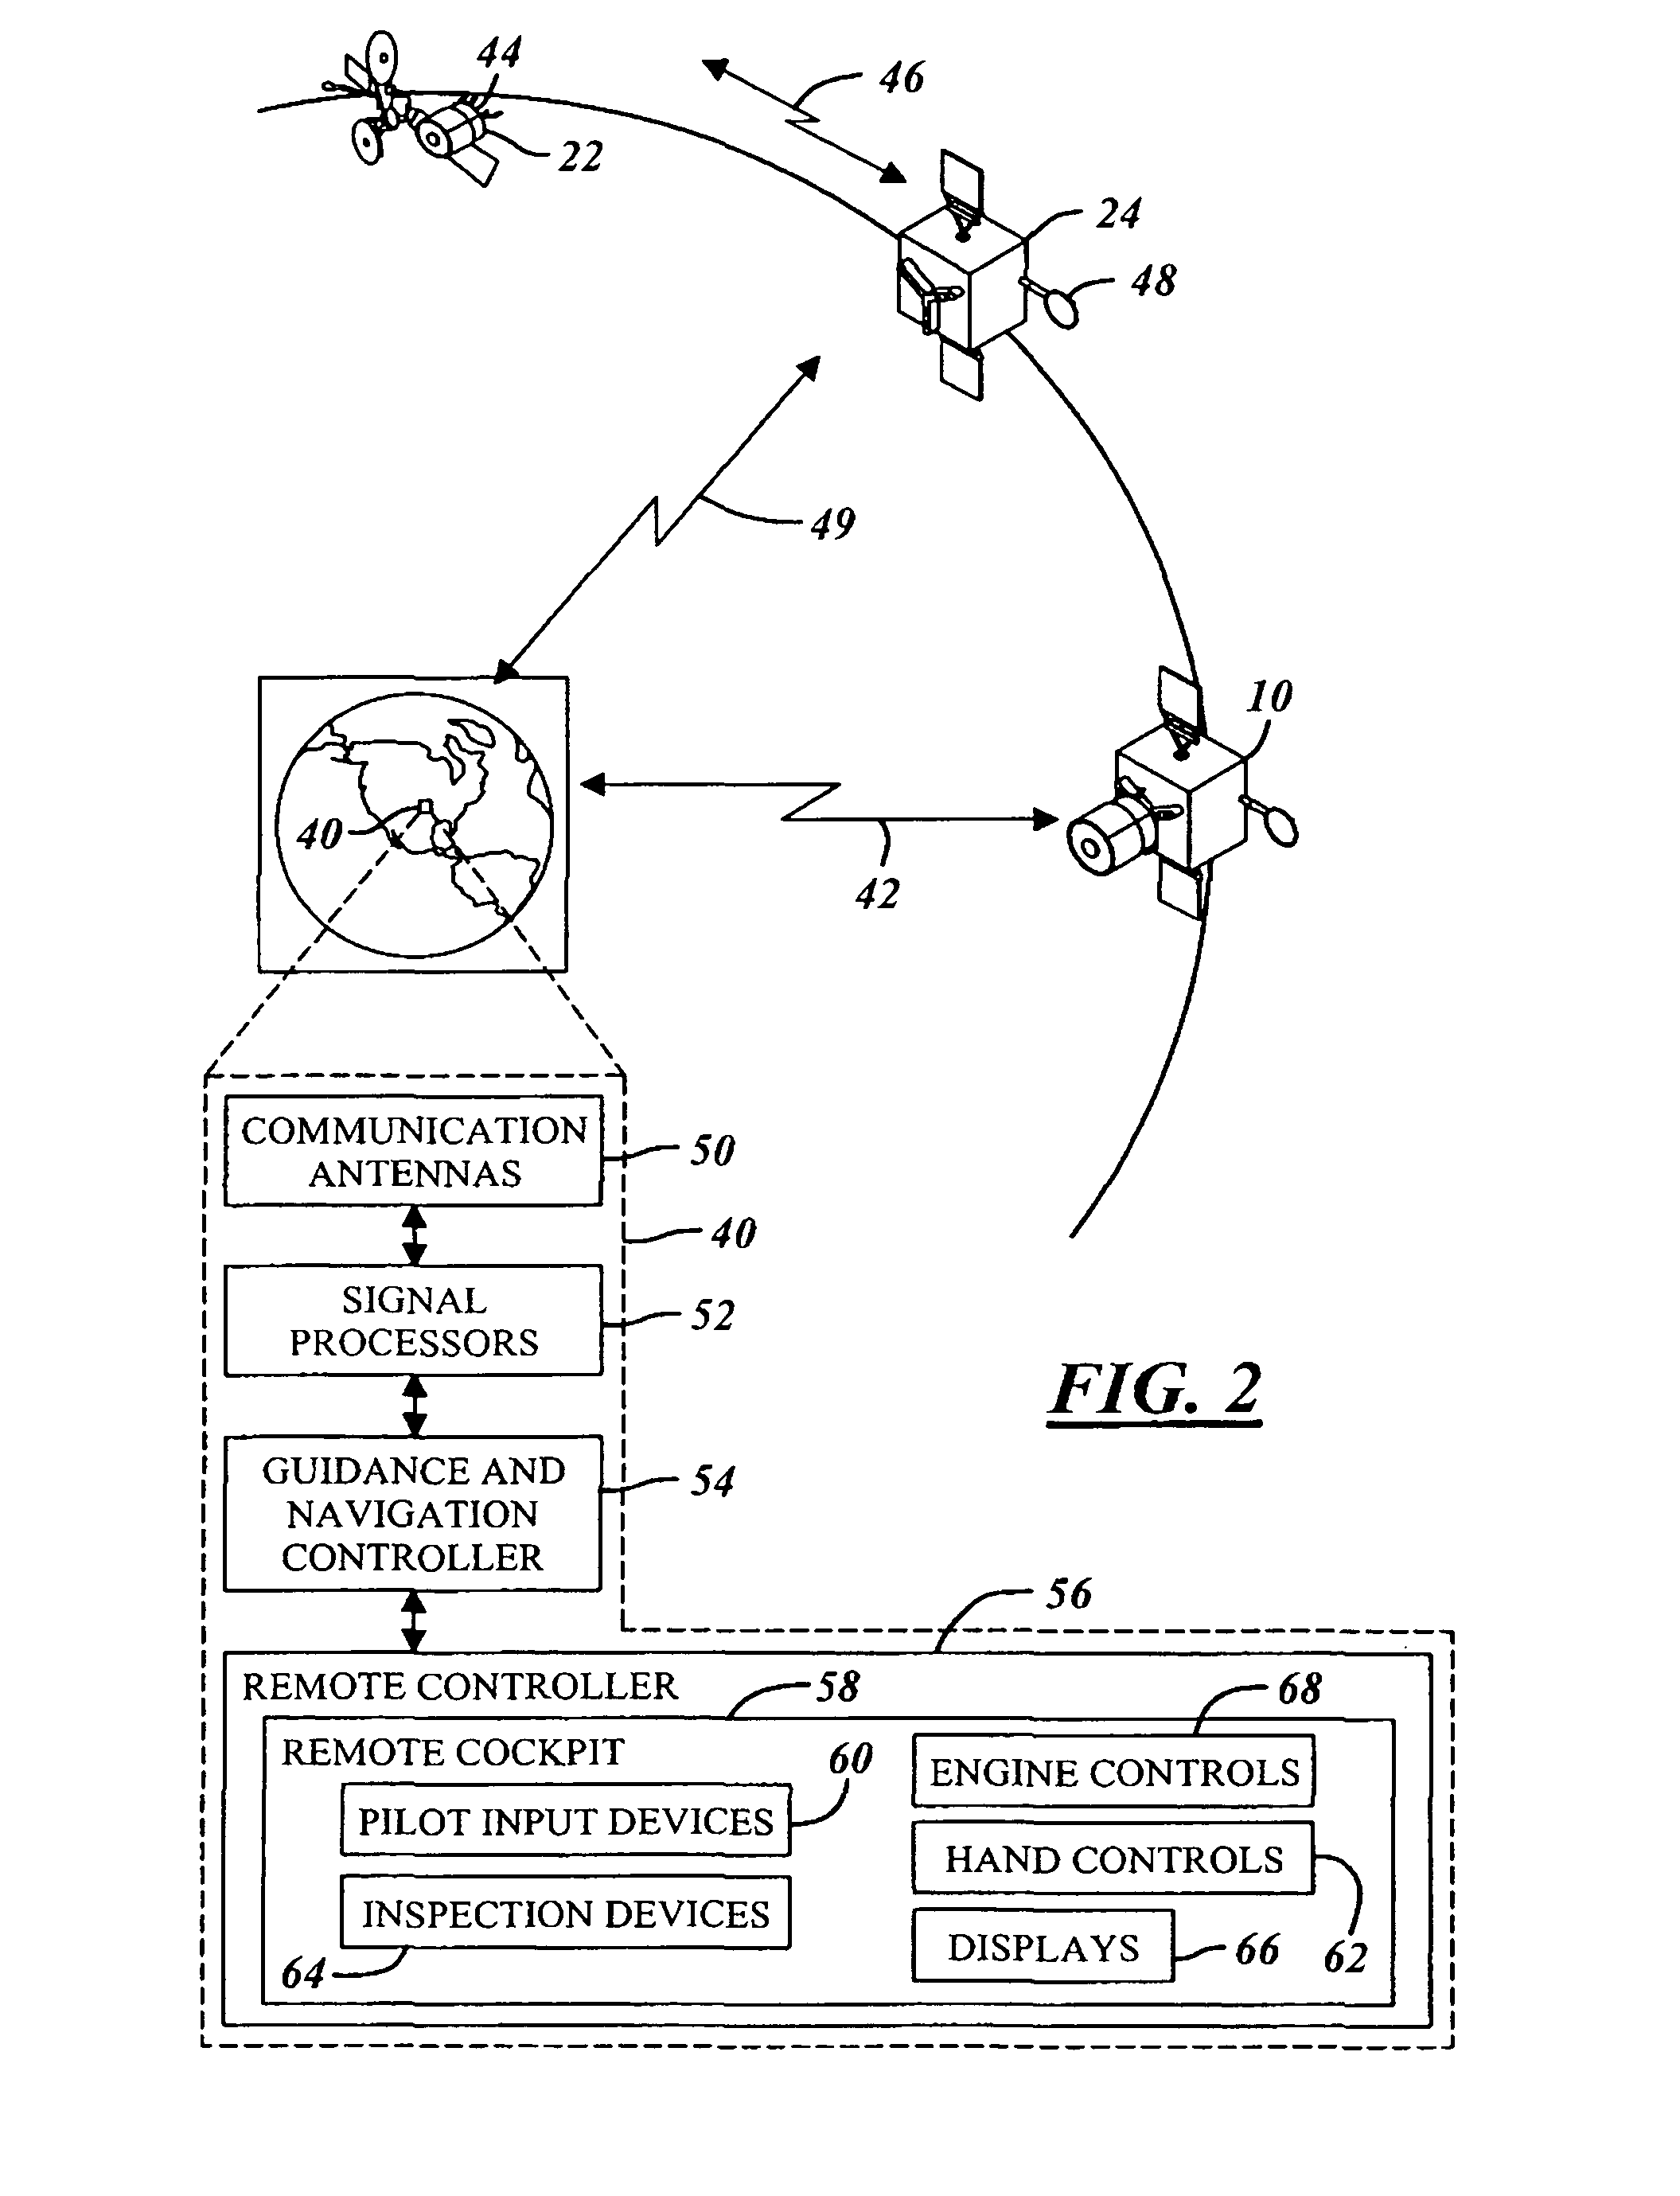 Two part spacecraft servicing vehicle system with adaptors, tools, and attachment mechanisms